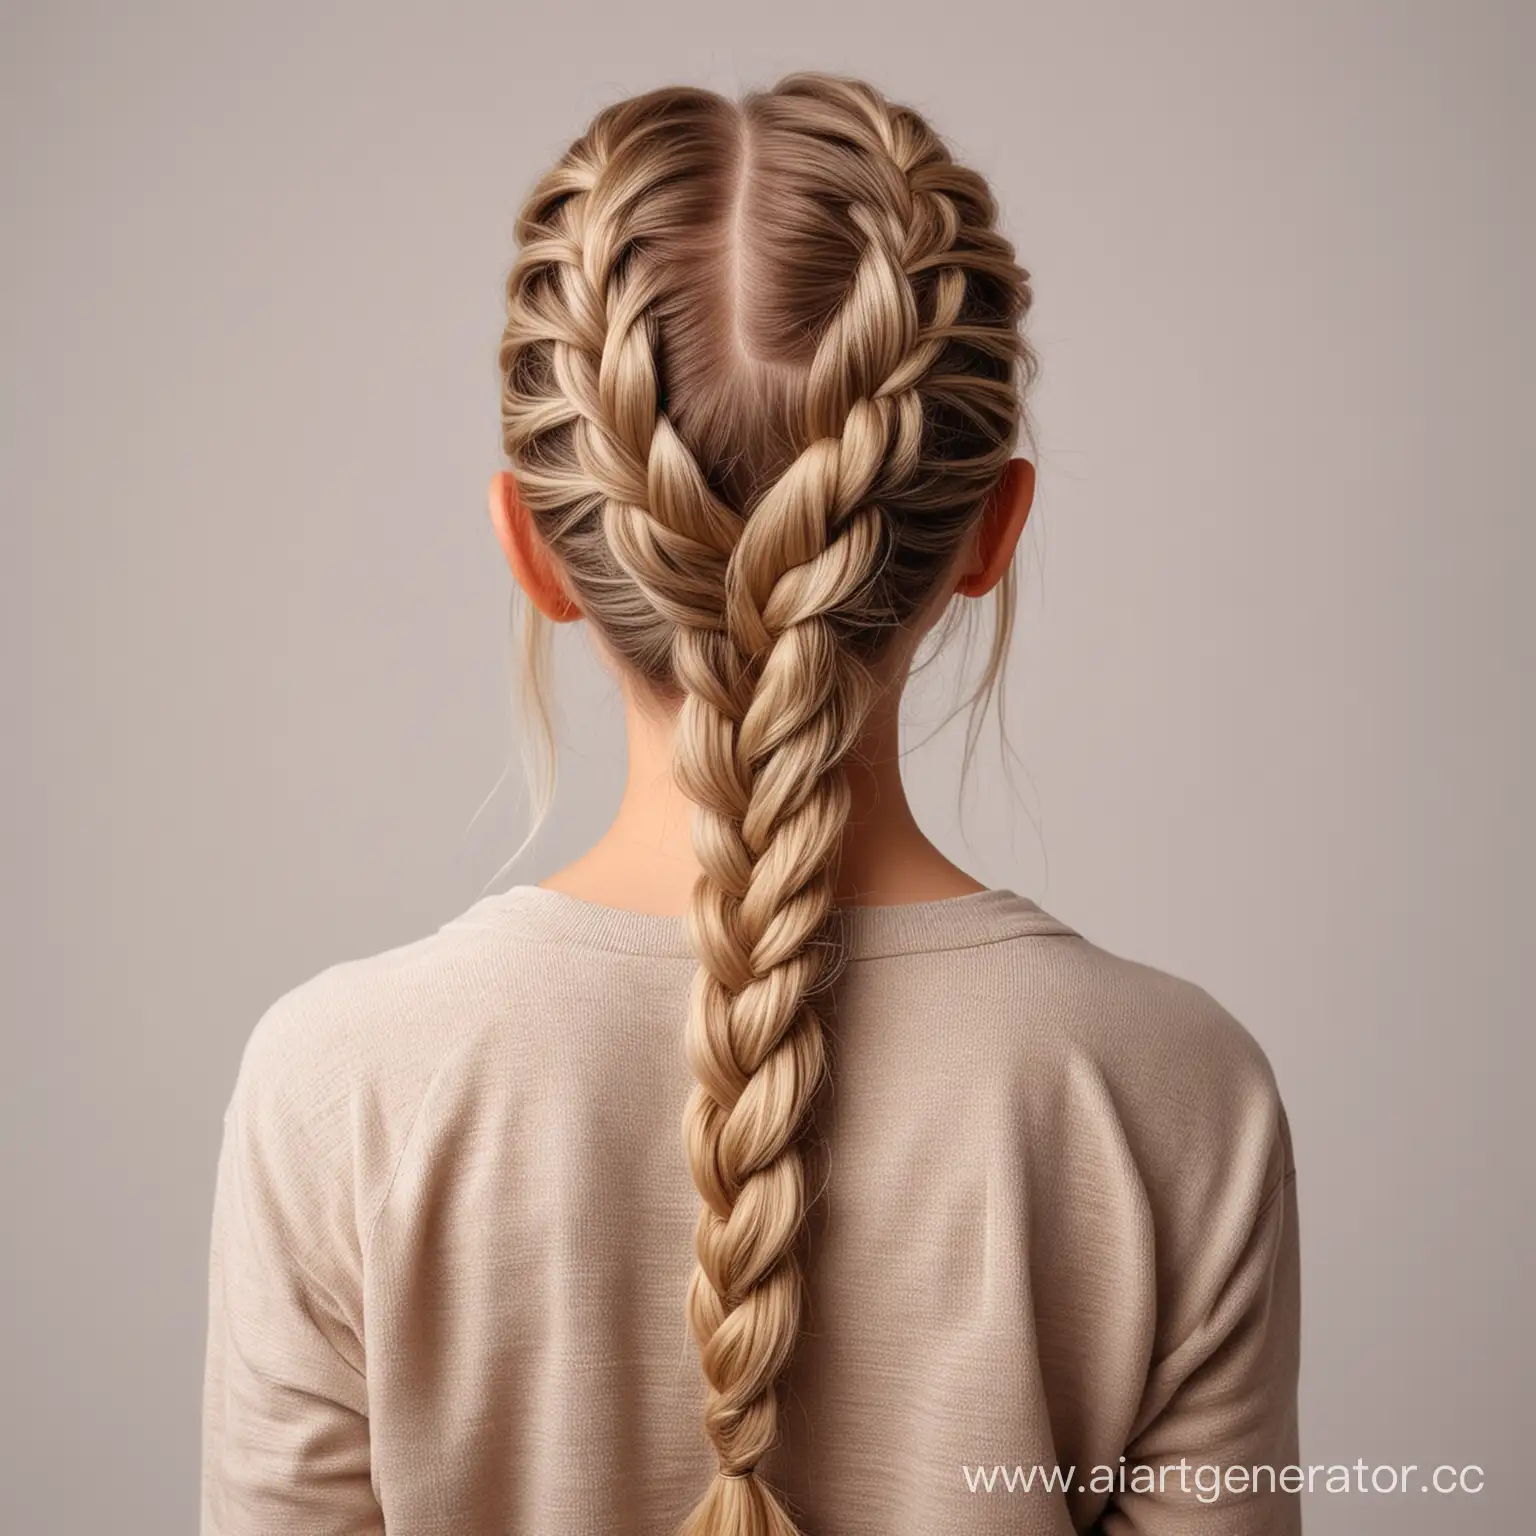  hair braided girl light-colored background standing with her back to the camera